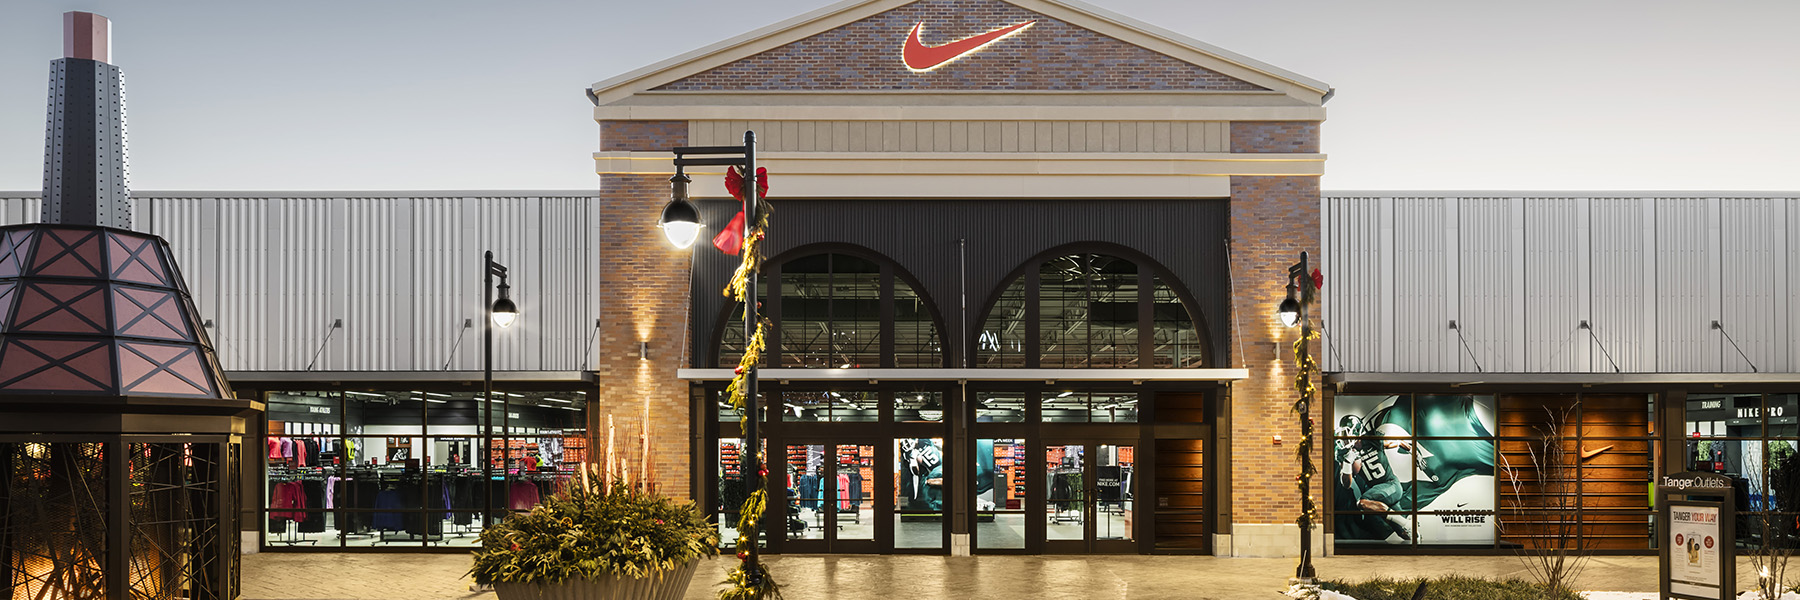 nike outlet grand river